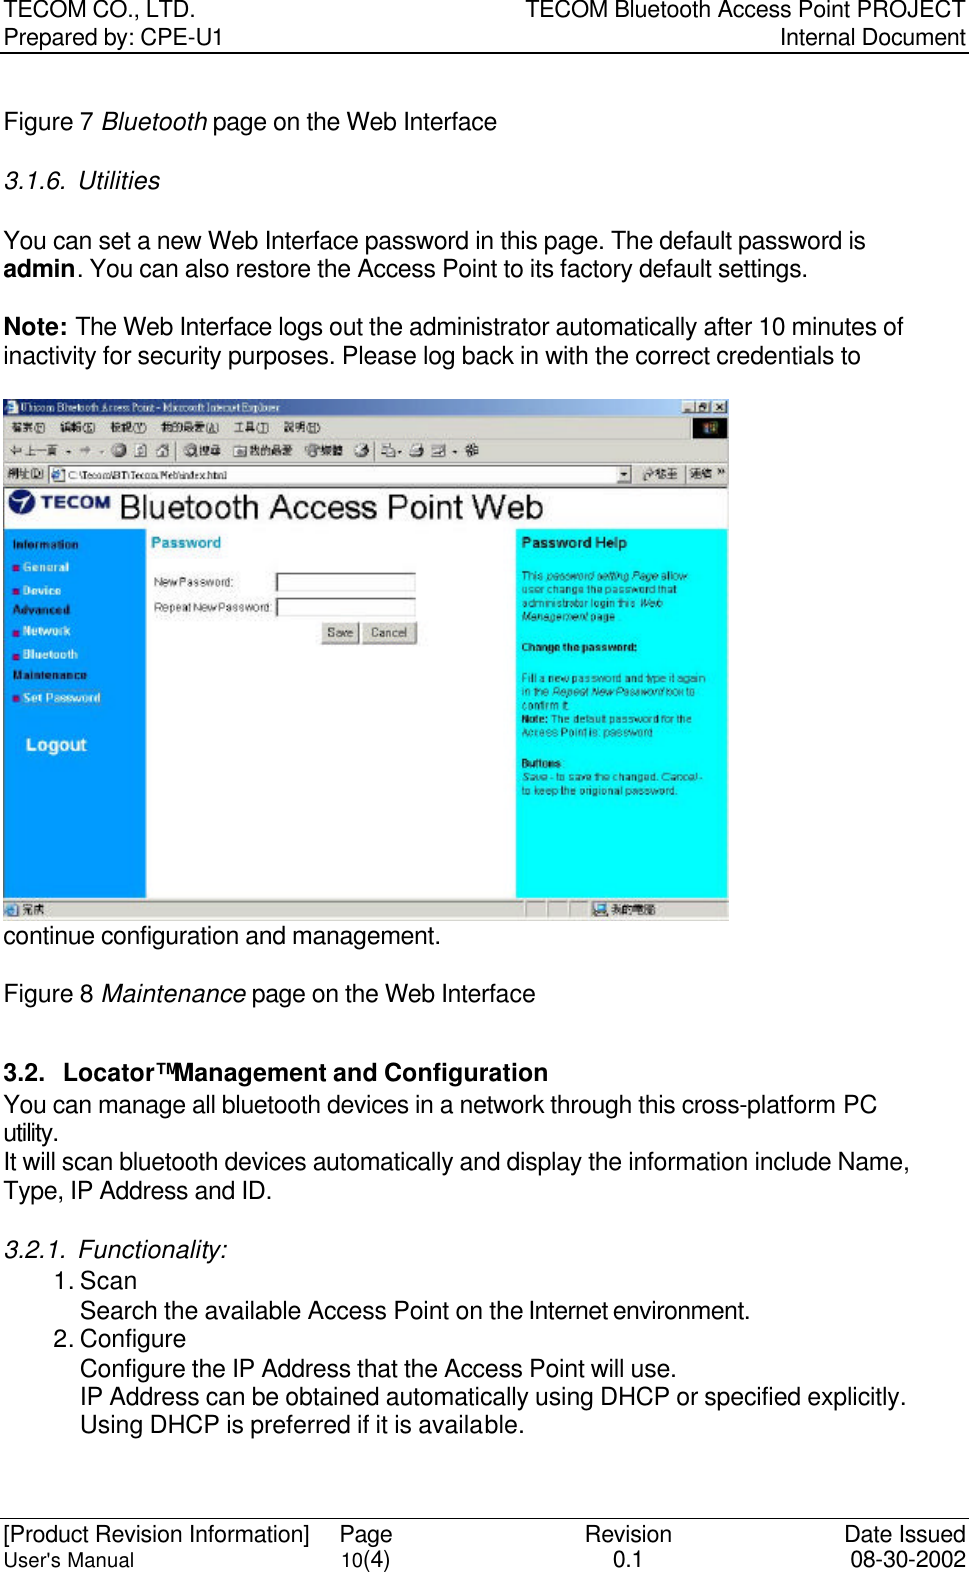 TECOM CO., LTD. TECOM Bluetooth Access Point PROJECT Prepared by: CPE-U1   Internal Document  [Product Revision Information] Page Revision Date Issued User&apos;s Manual 10(4) 0.1 08-30-2002  Figure 7 Bluetooth page on the Web Interface 3.1.6. Utilities  You can set a new Web Interface password in this page. The default password is admin. You can also restore the Access Point to its factory default settings.    Note: The Web Interface logs out the administrator automatically after 10 minutes of inactivity for security purposes. Please log back in with the correct credentials to continue configuration and management.  Figure 8 Maintenance page on the Web Interface  3.2. Locator™ Management and Configuration You can manage all bluetooth devices in a network through this cross-platform PC utility. It will scan bluetooth devices automatically and display the information include Name, Type, IP Address and ID. 3.2.1. Functionality: 1. Scan Search the available Access Point on the Internet environment. 2. Configure Configure the IP Address that the Access Point will use.   IP Address can be obtained automatically using DHCP or specified explicitly. Using DHCP is preferred if it is available. 